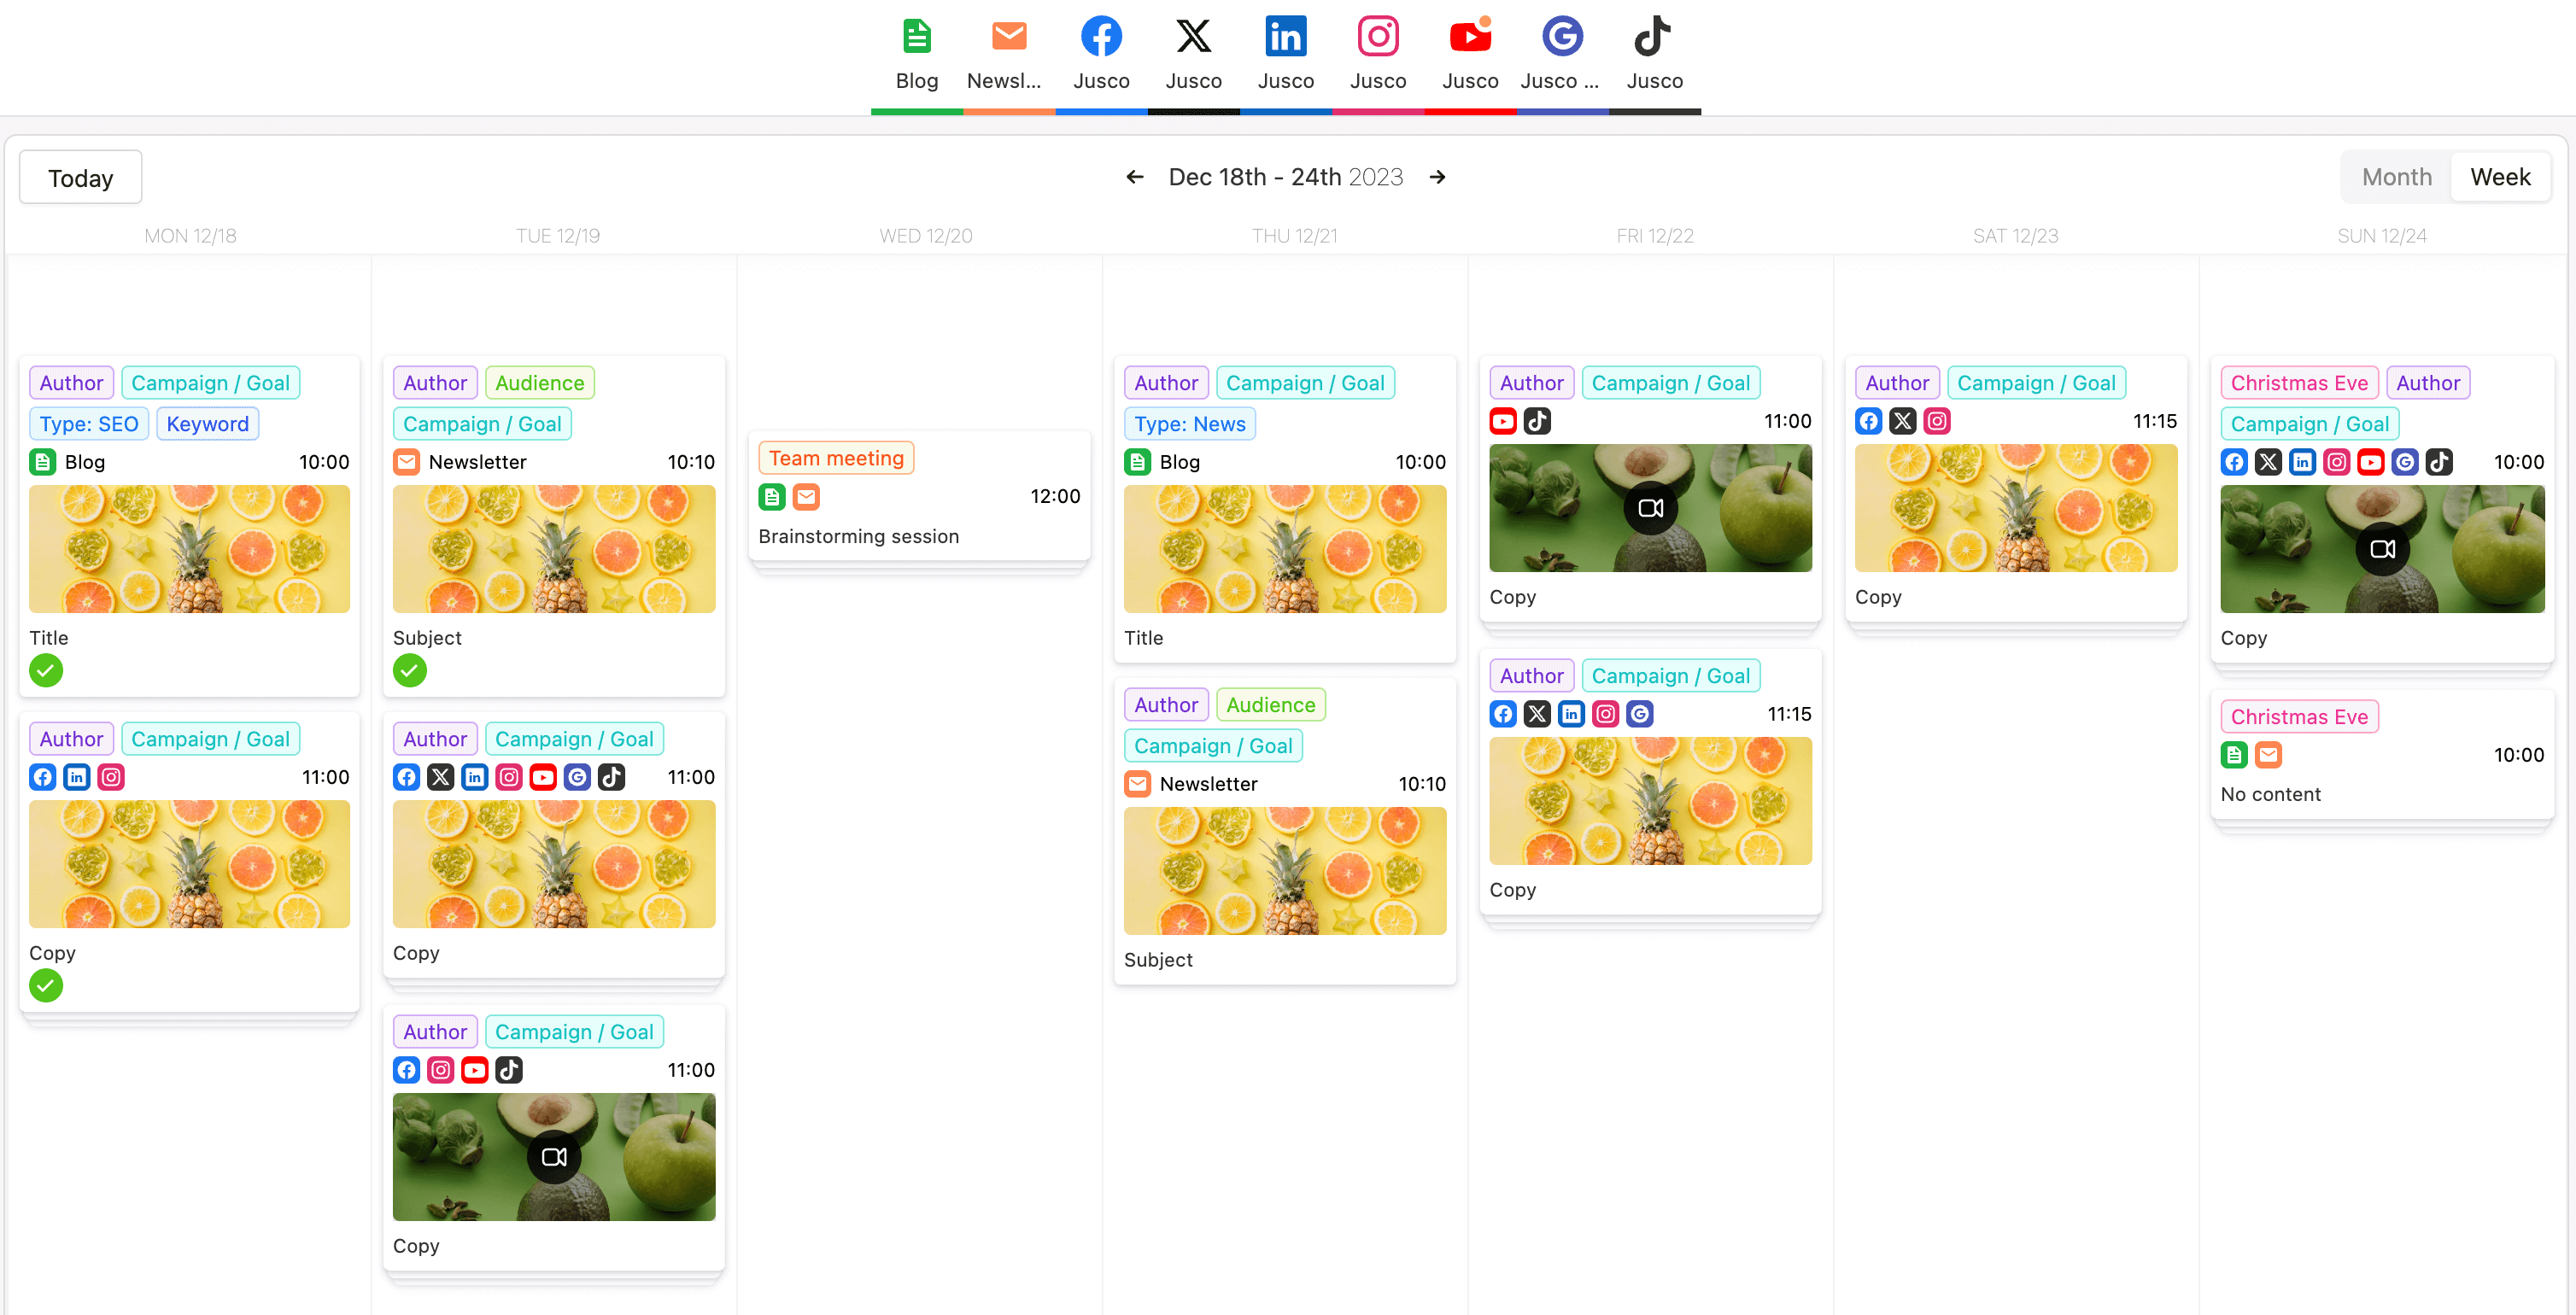 Content calendar template in Planable for different social media platforms and Universal Content pieces such as blog posts and newsletters